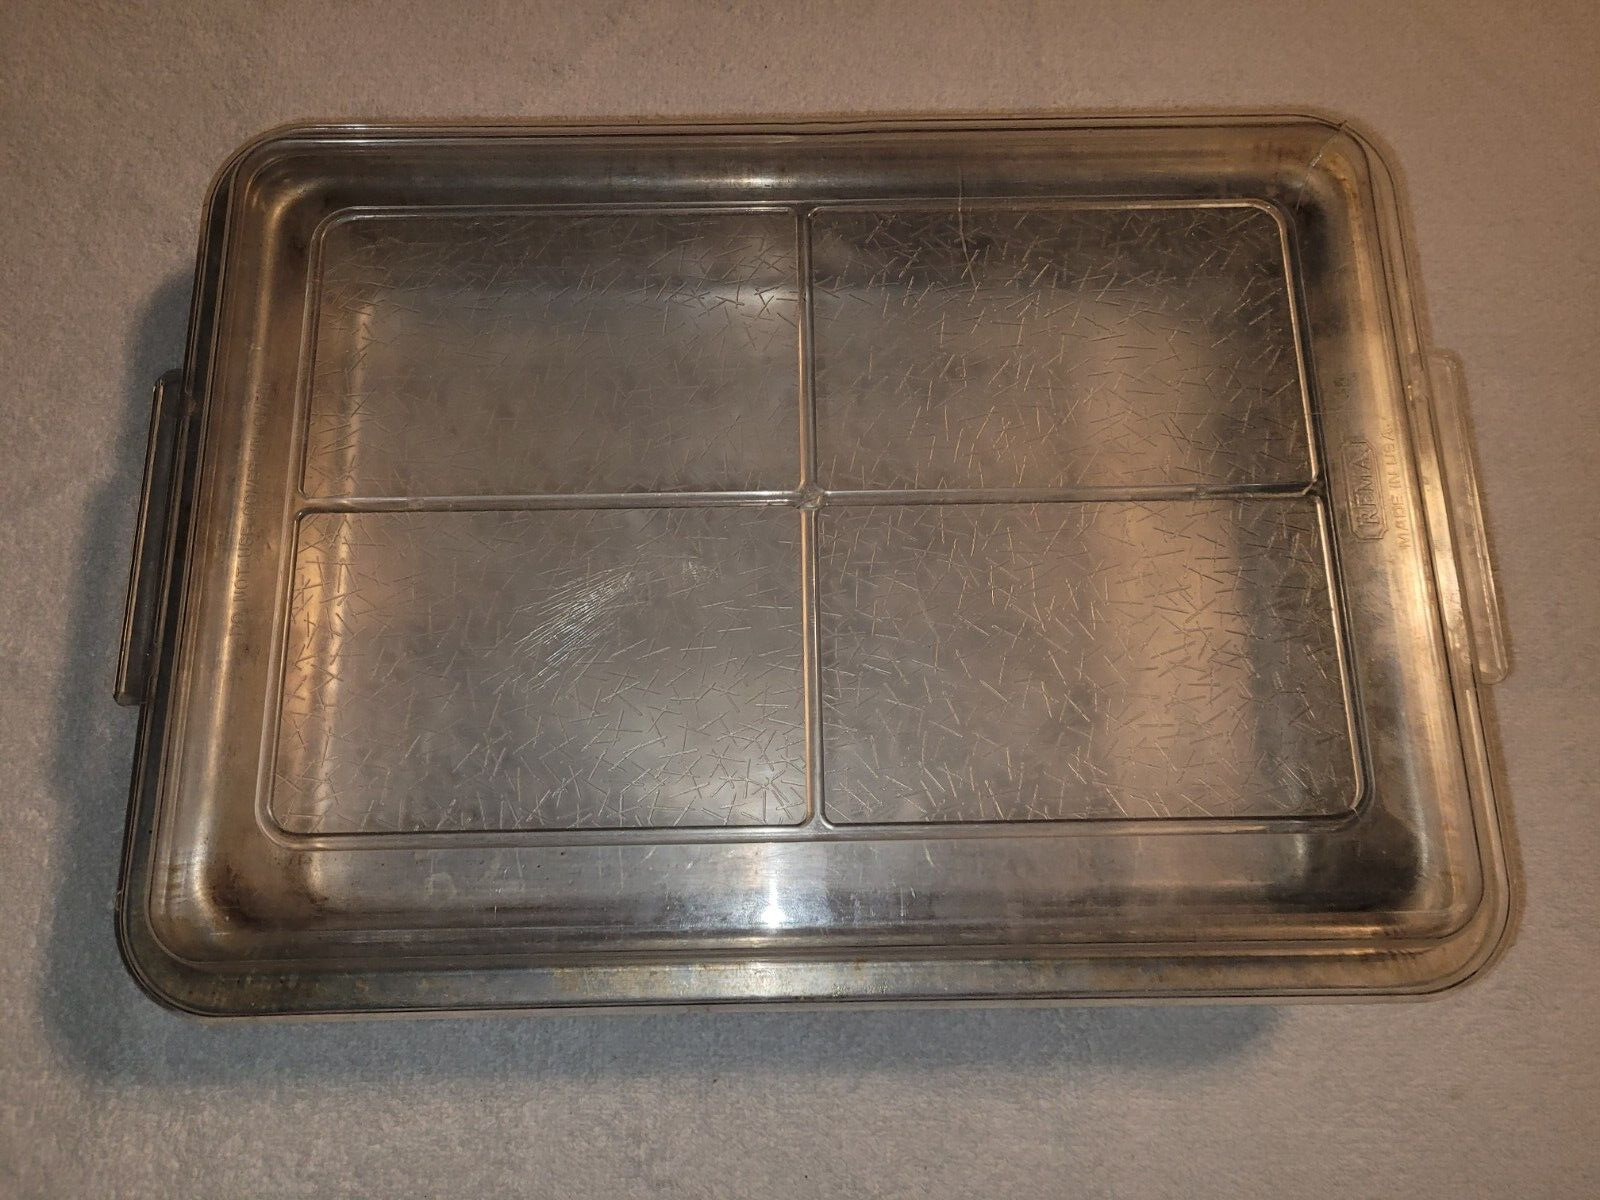 Vintage Rema Air Bake Double Wall Insulated Aluminum 9x13 Baking Pan with Lid